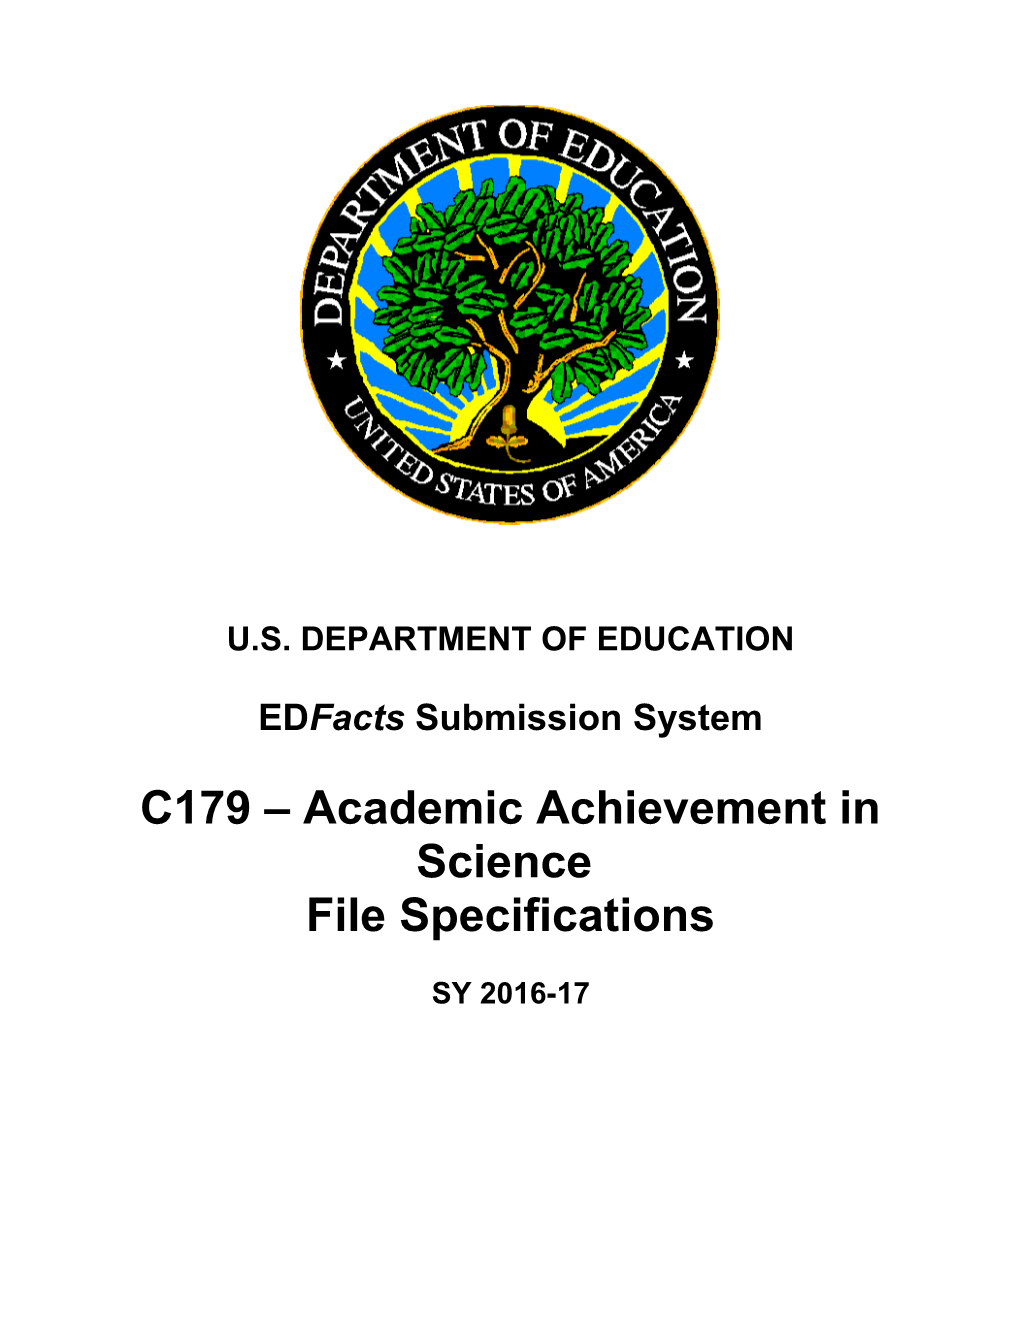 Academic Achievement in Science File Specifications (Msword)